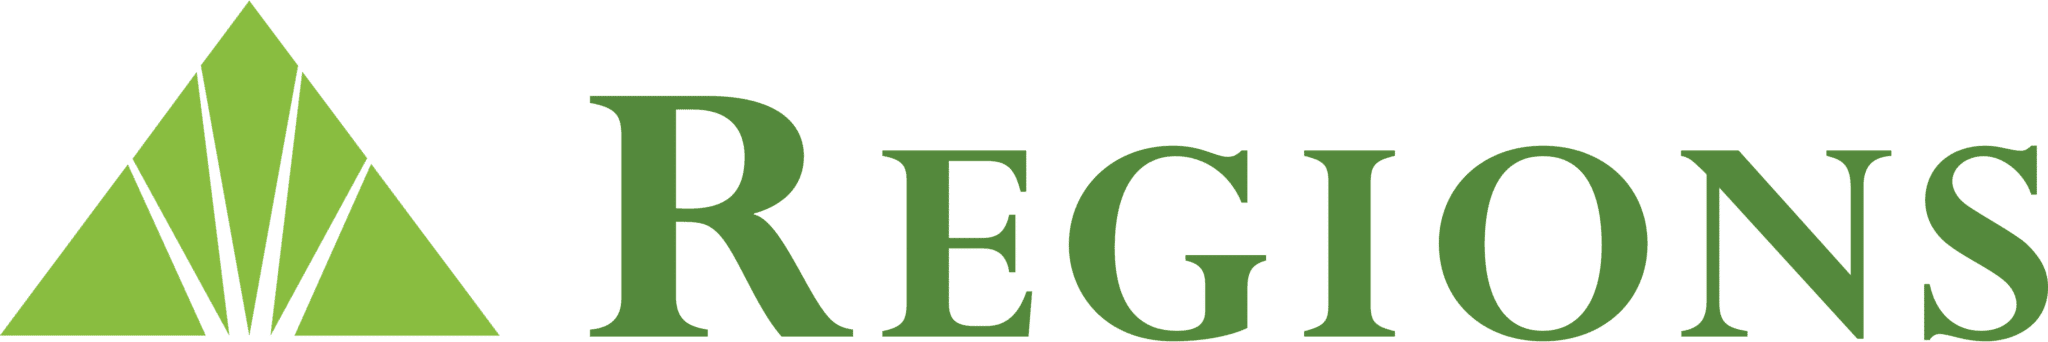 Regions Bank physician mortgage